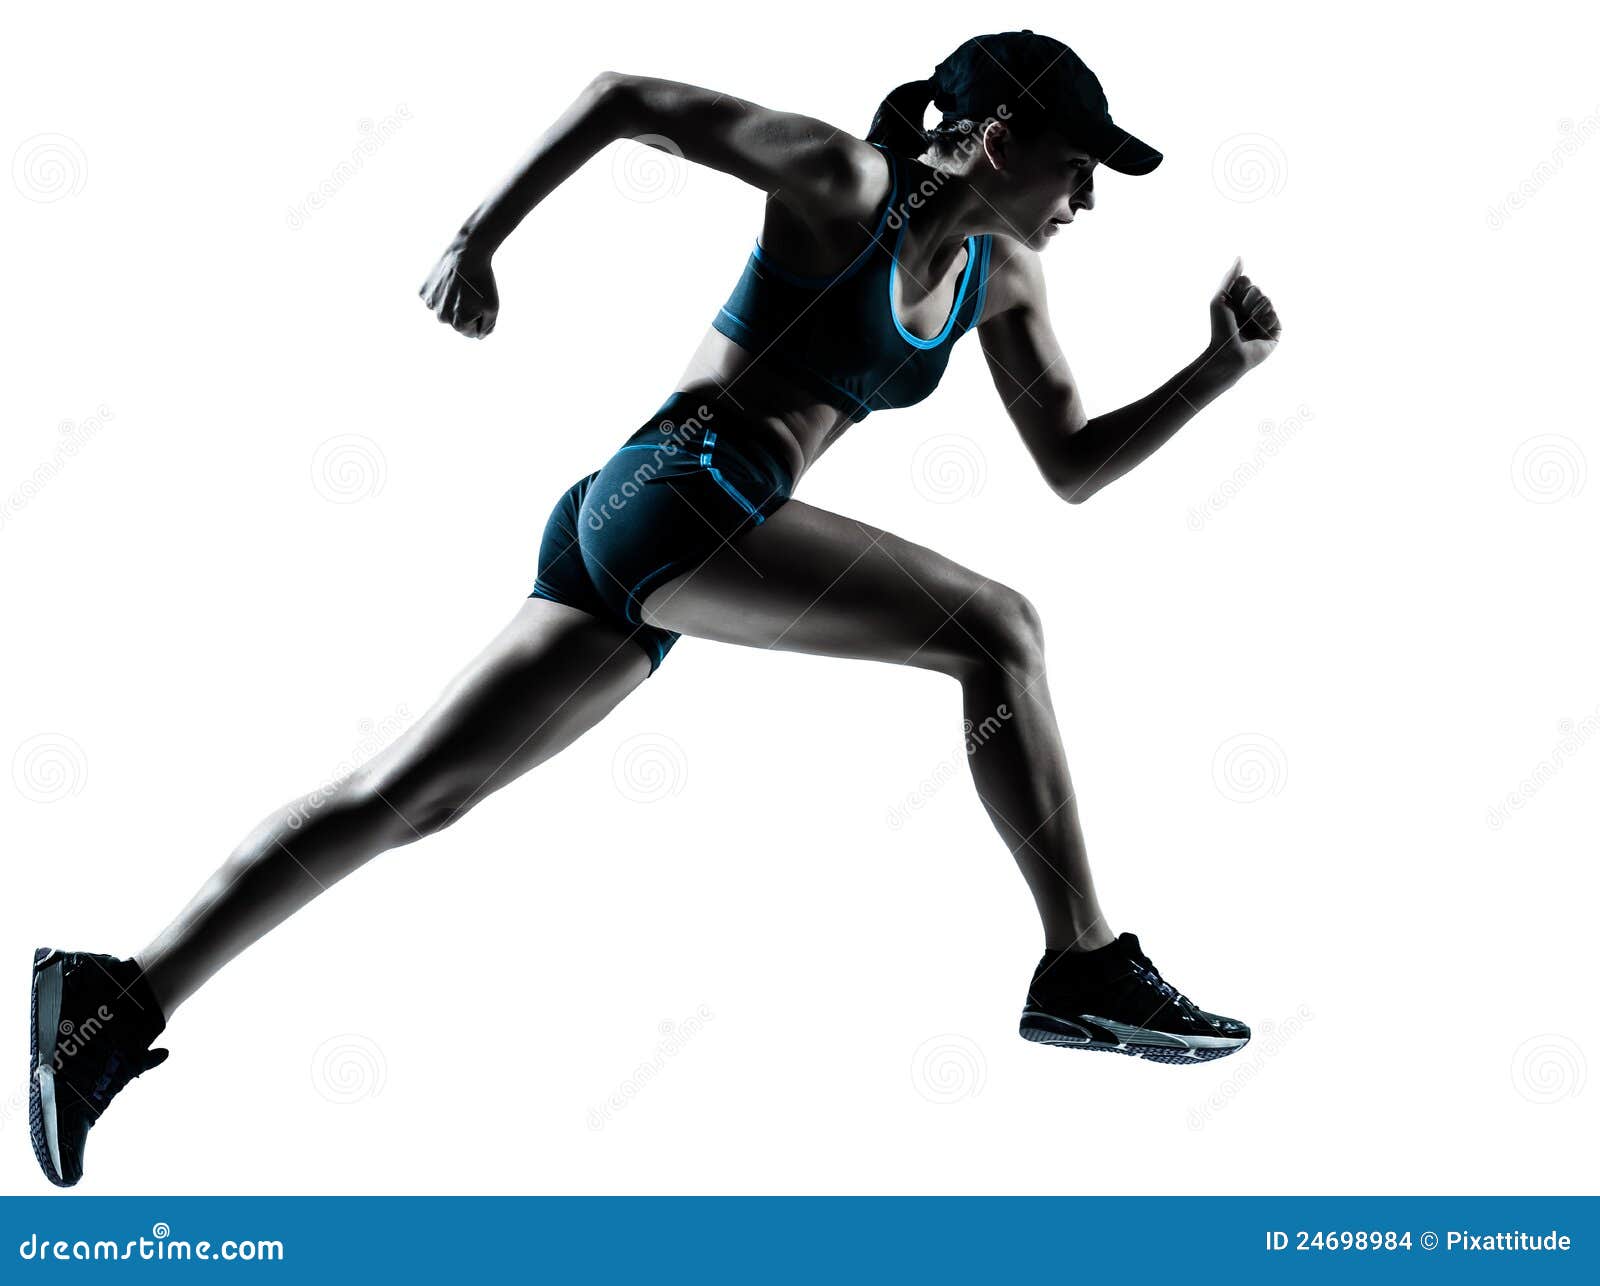 Athletic woman on running track getting ready to start run 